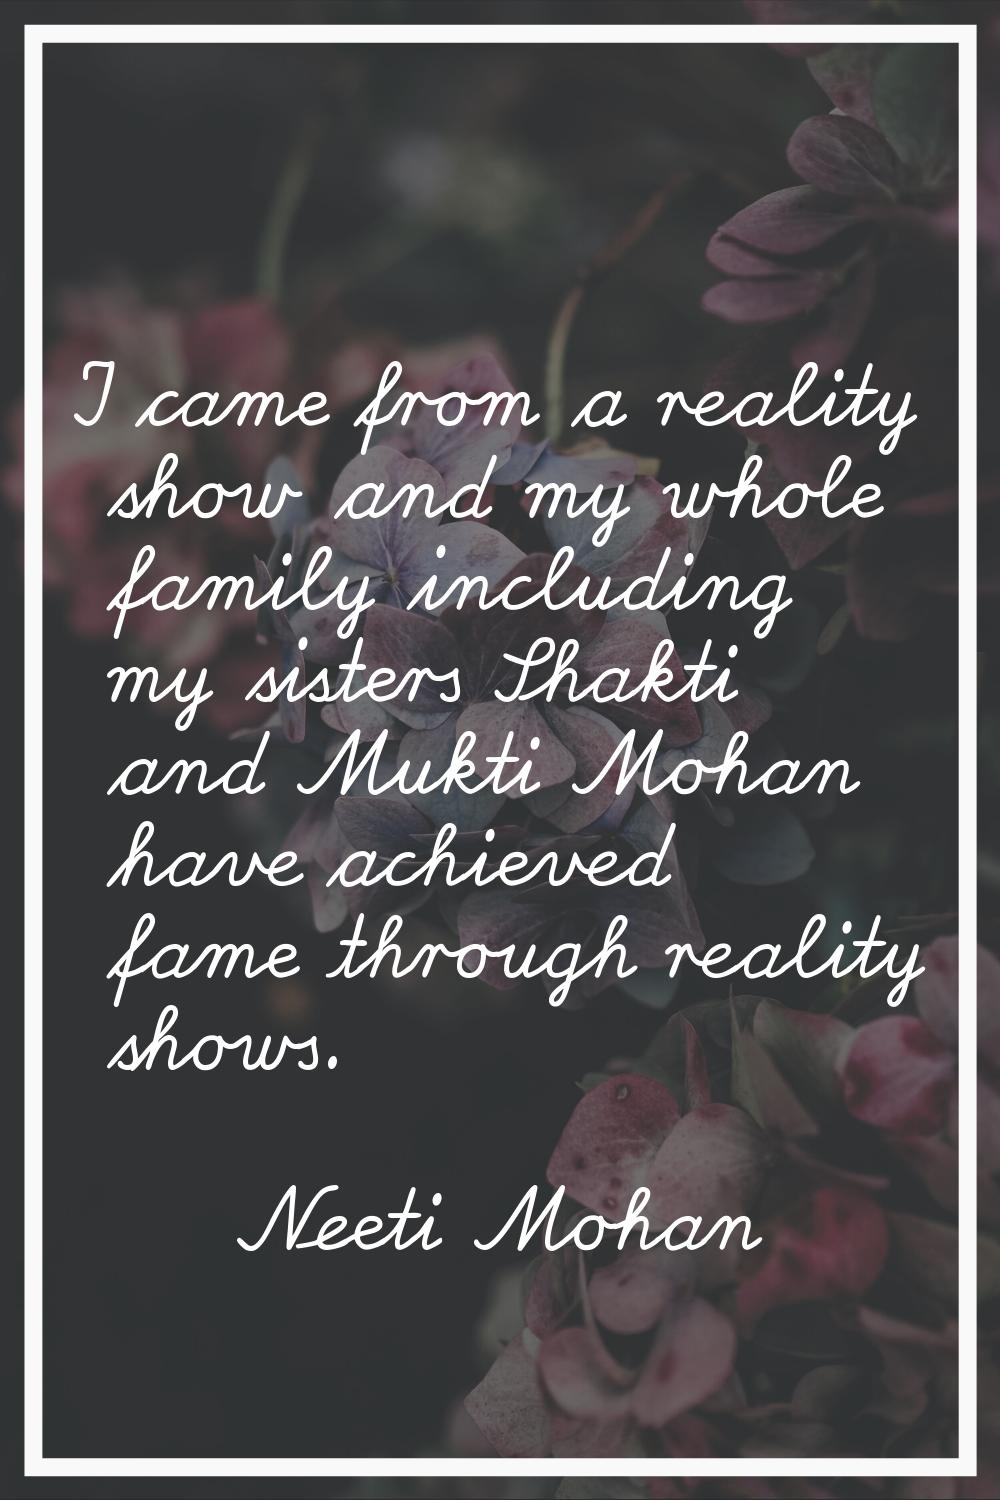 I came from a reality show and my whole family including my sisters Shakti and Mukti Mohan have ach